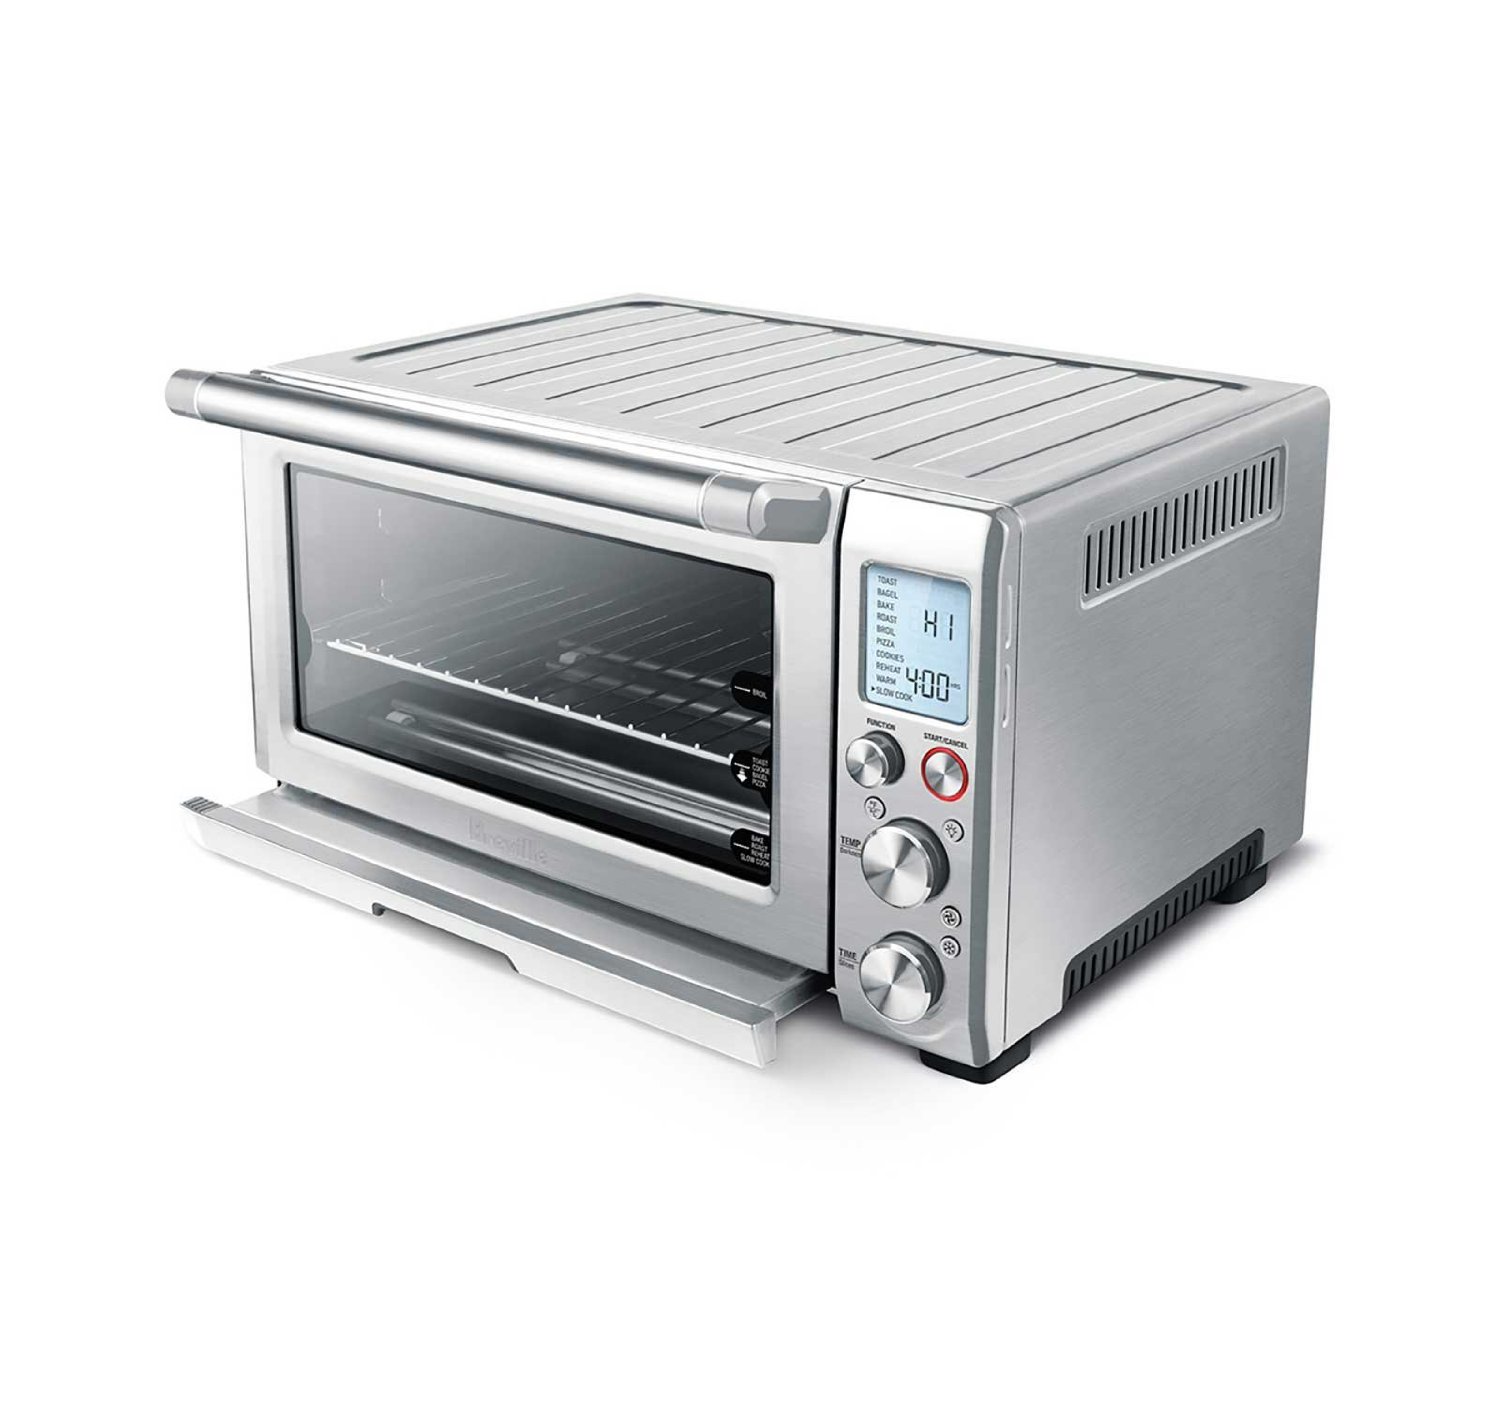 Breville Smart Oven Pro Toaster Oven with Element IQ, 1800 W, Stainless Steel - image 2 of 4